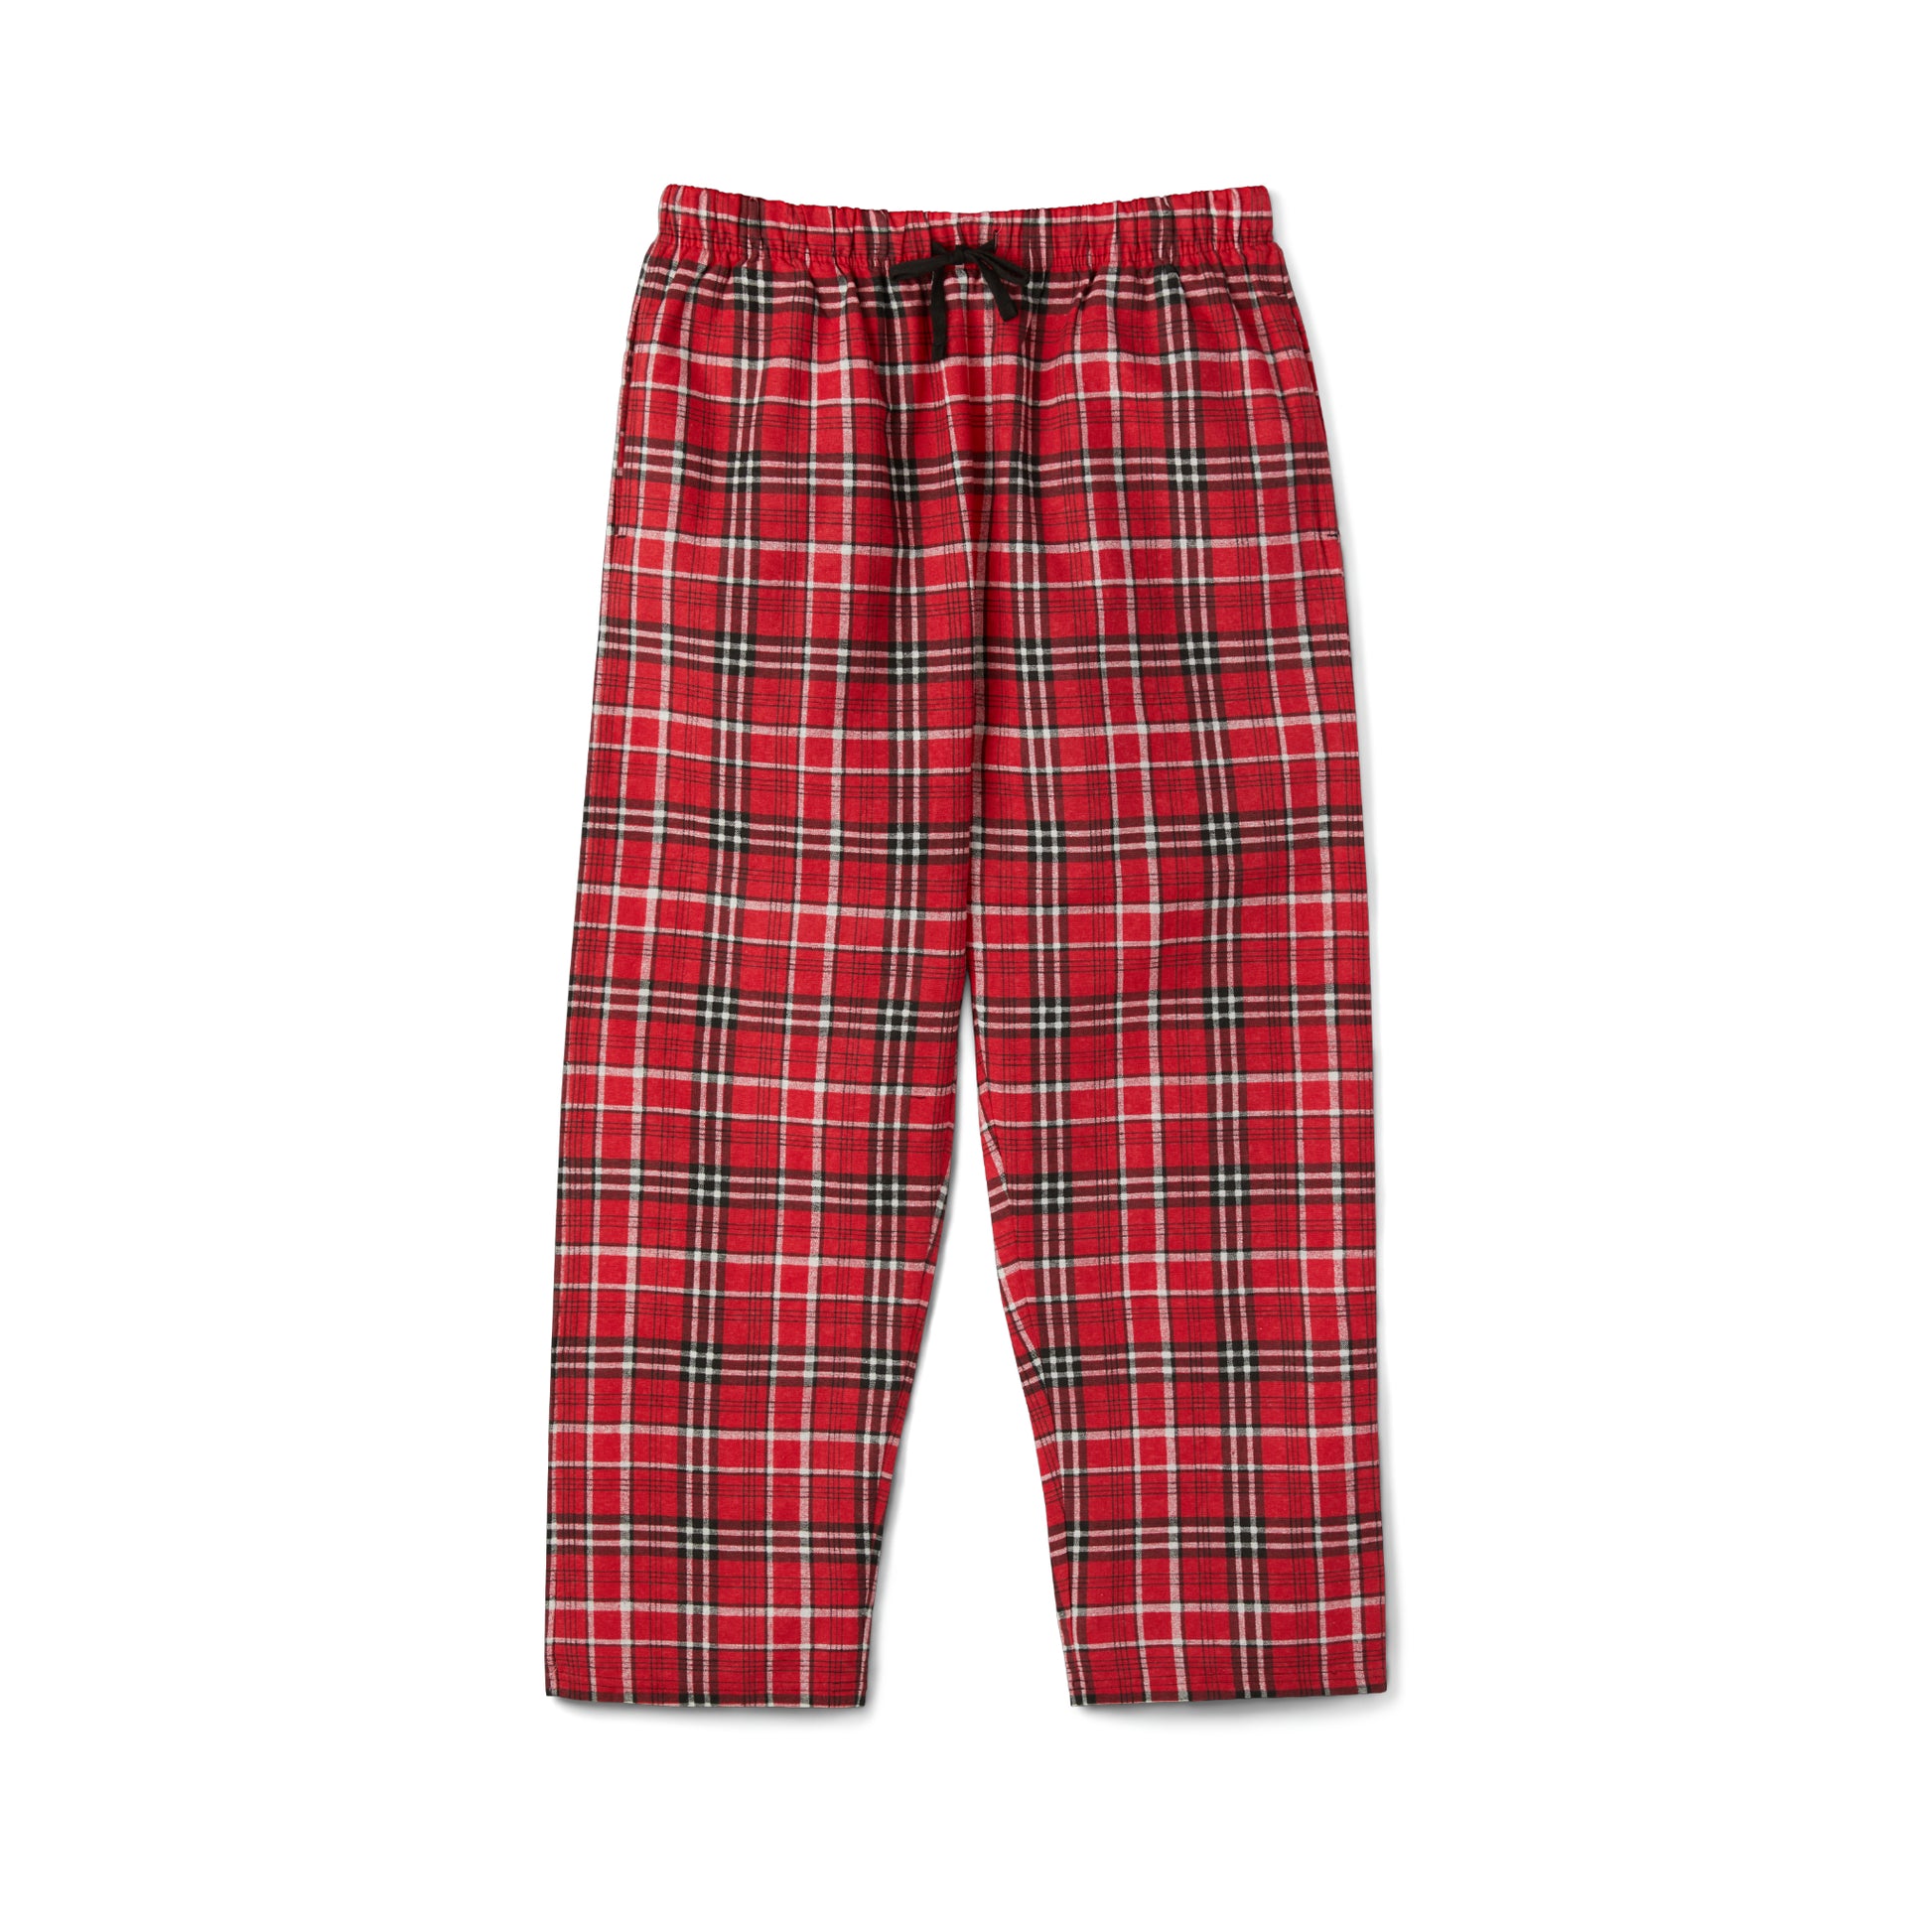 Red and black plaid Women's Pajama-Set: 2 pieces; Long-sleeve; 100% cotton made by Printify.